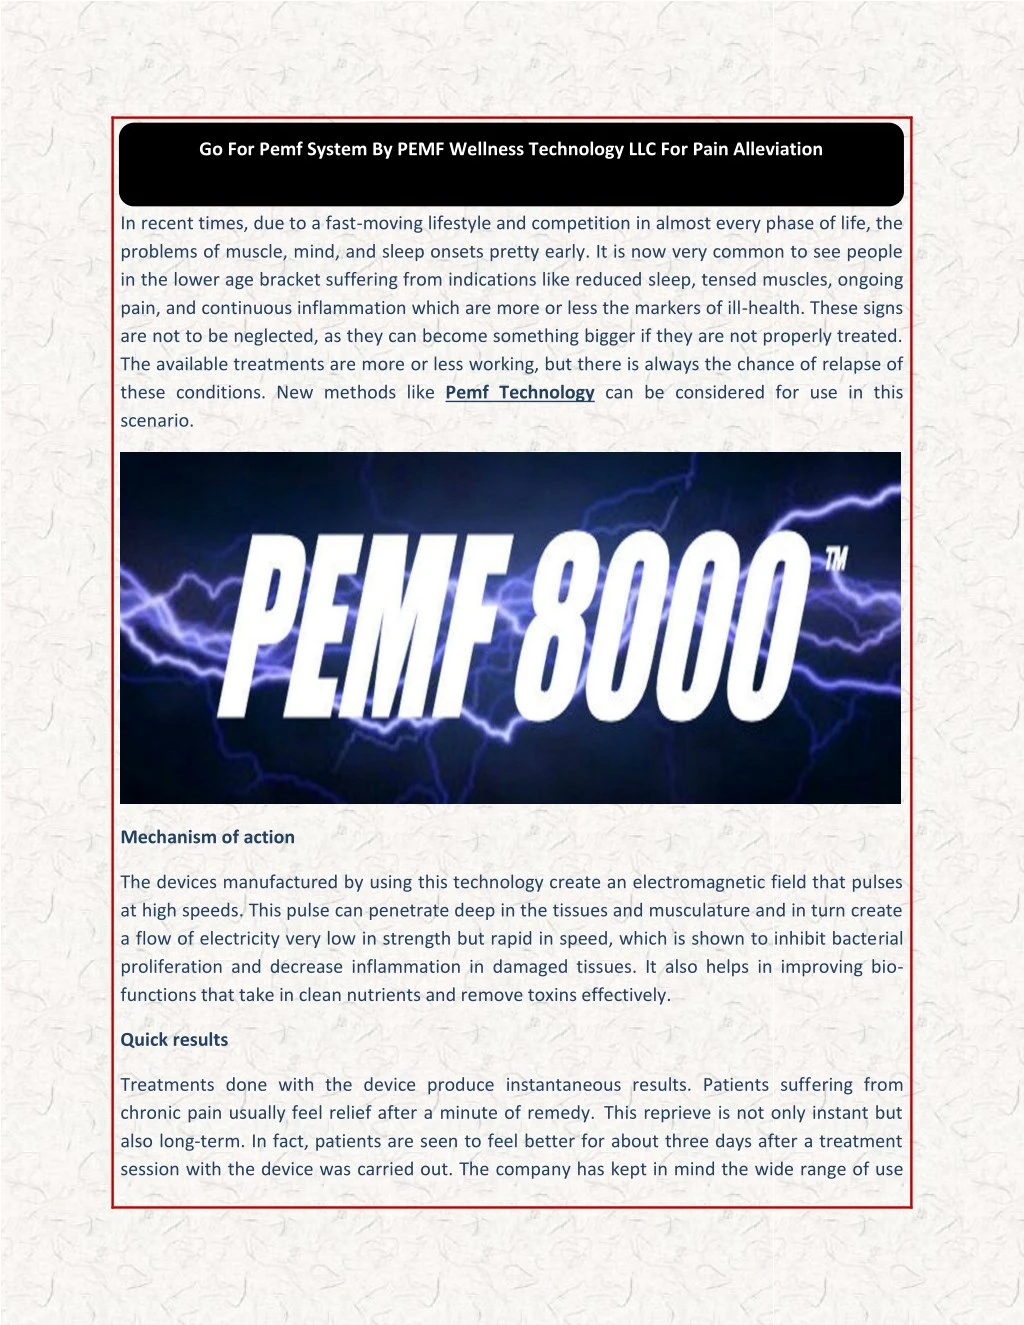 go for pemf system by pemf wellness technology